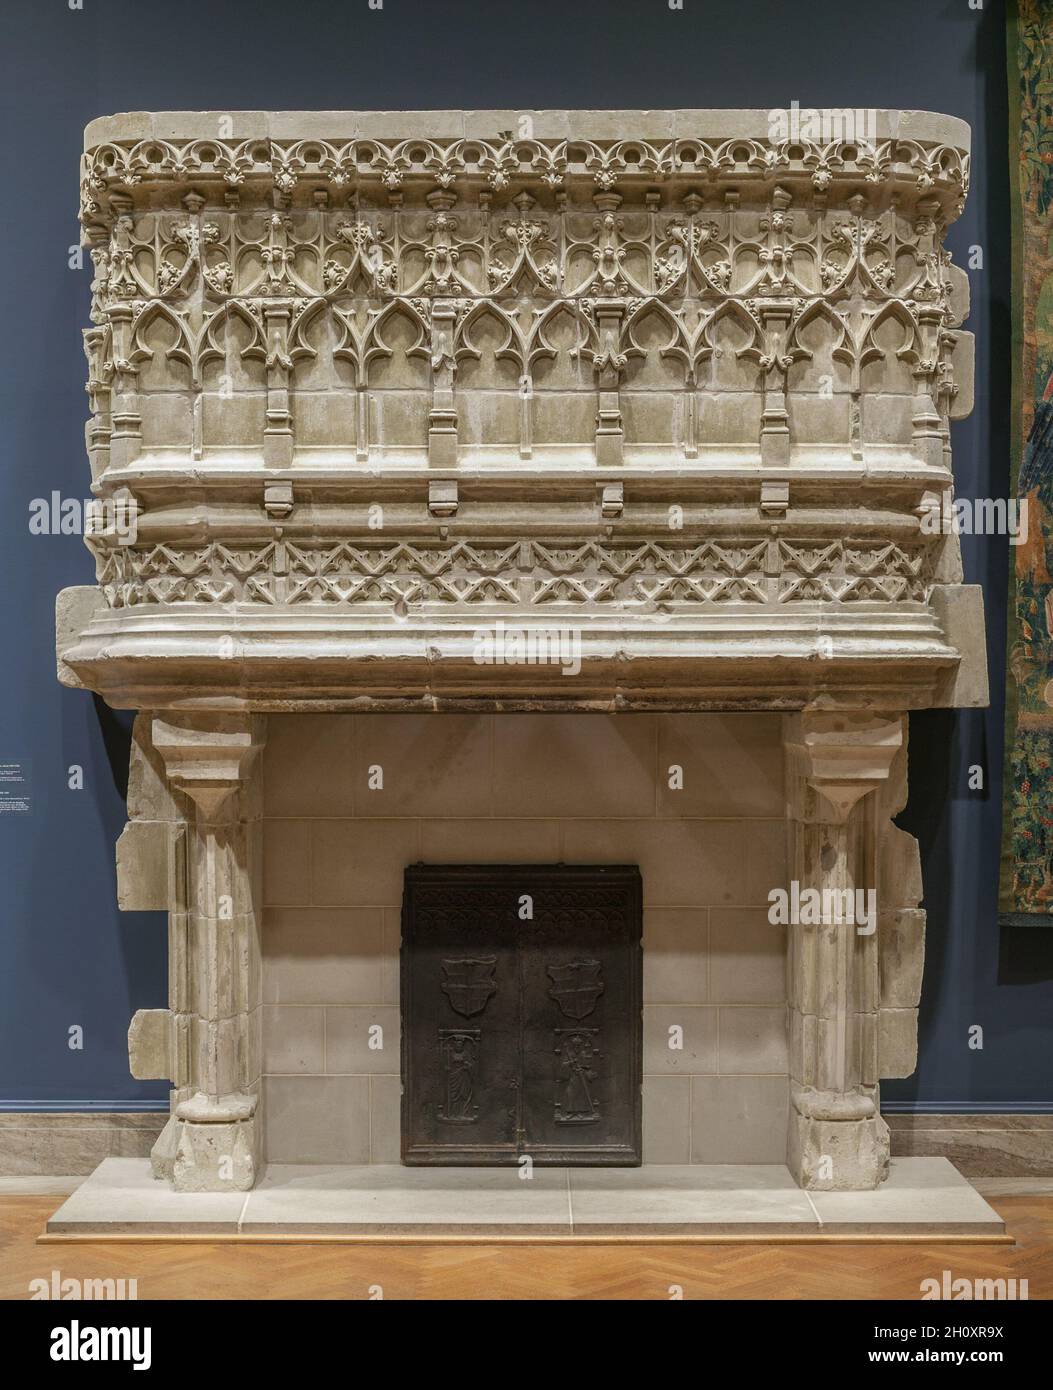 Chimney Piece, c. 1480-1520. France, Champagne, late 15th century-early 16th century. Limestone; overall: 425.9 x 321.2 x 82.6 cm (167 11/16 x 126 7/16 x 32 1/2 in.).  This chimney piece is believed to have once been part of the château at Amand-les-Eaux in northern France. Stock Photo